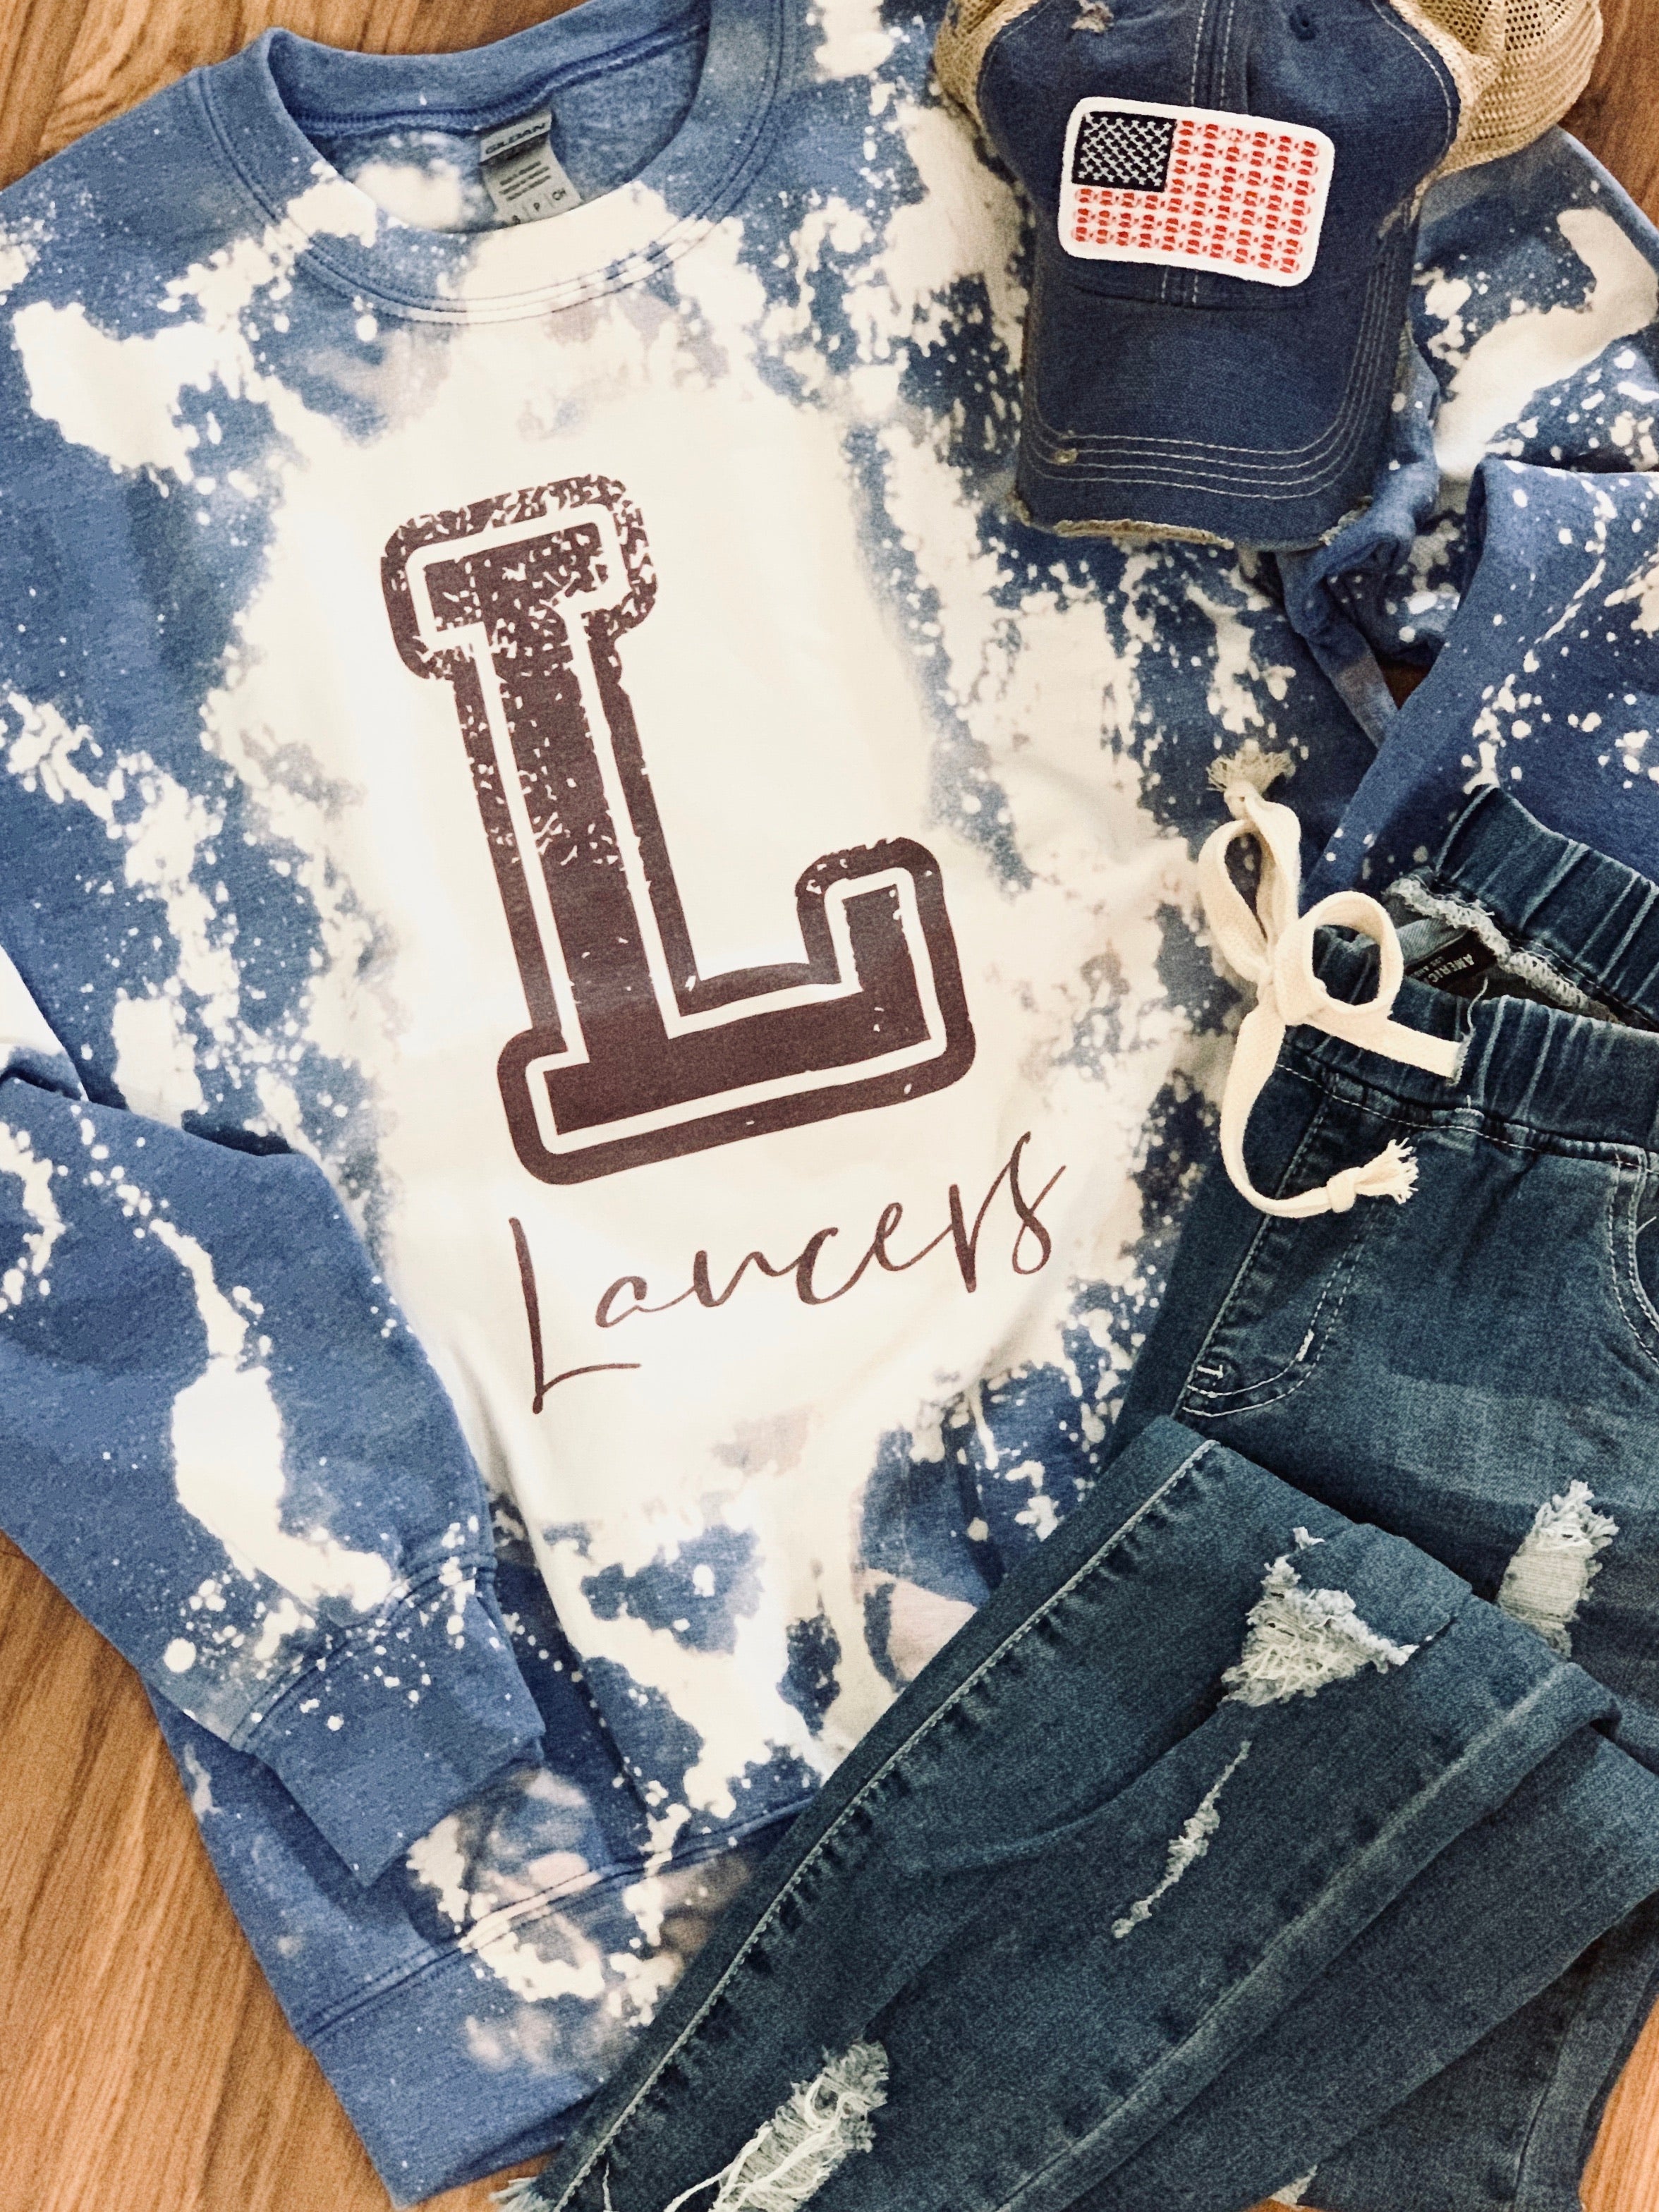 Bleached and Distressed Lakewood Lancers School Spirit Tops